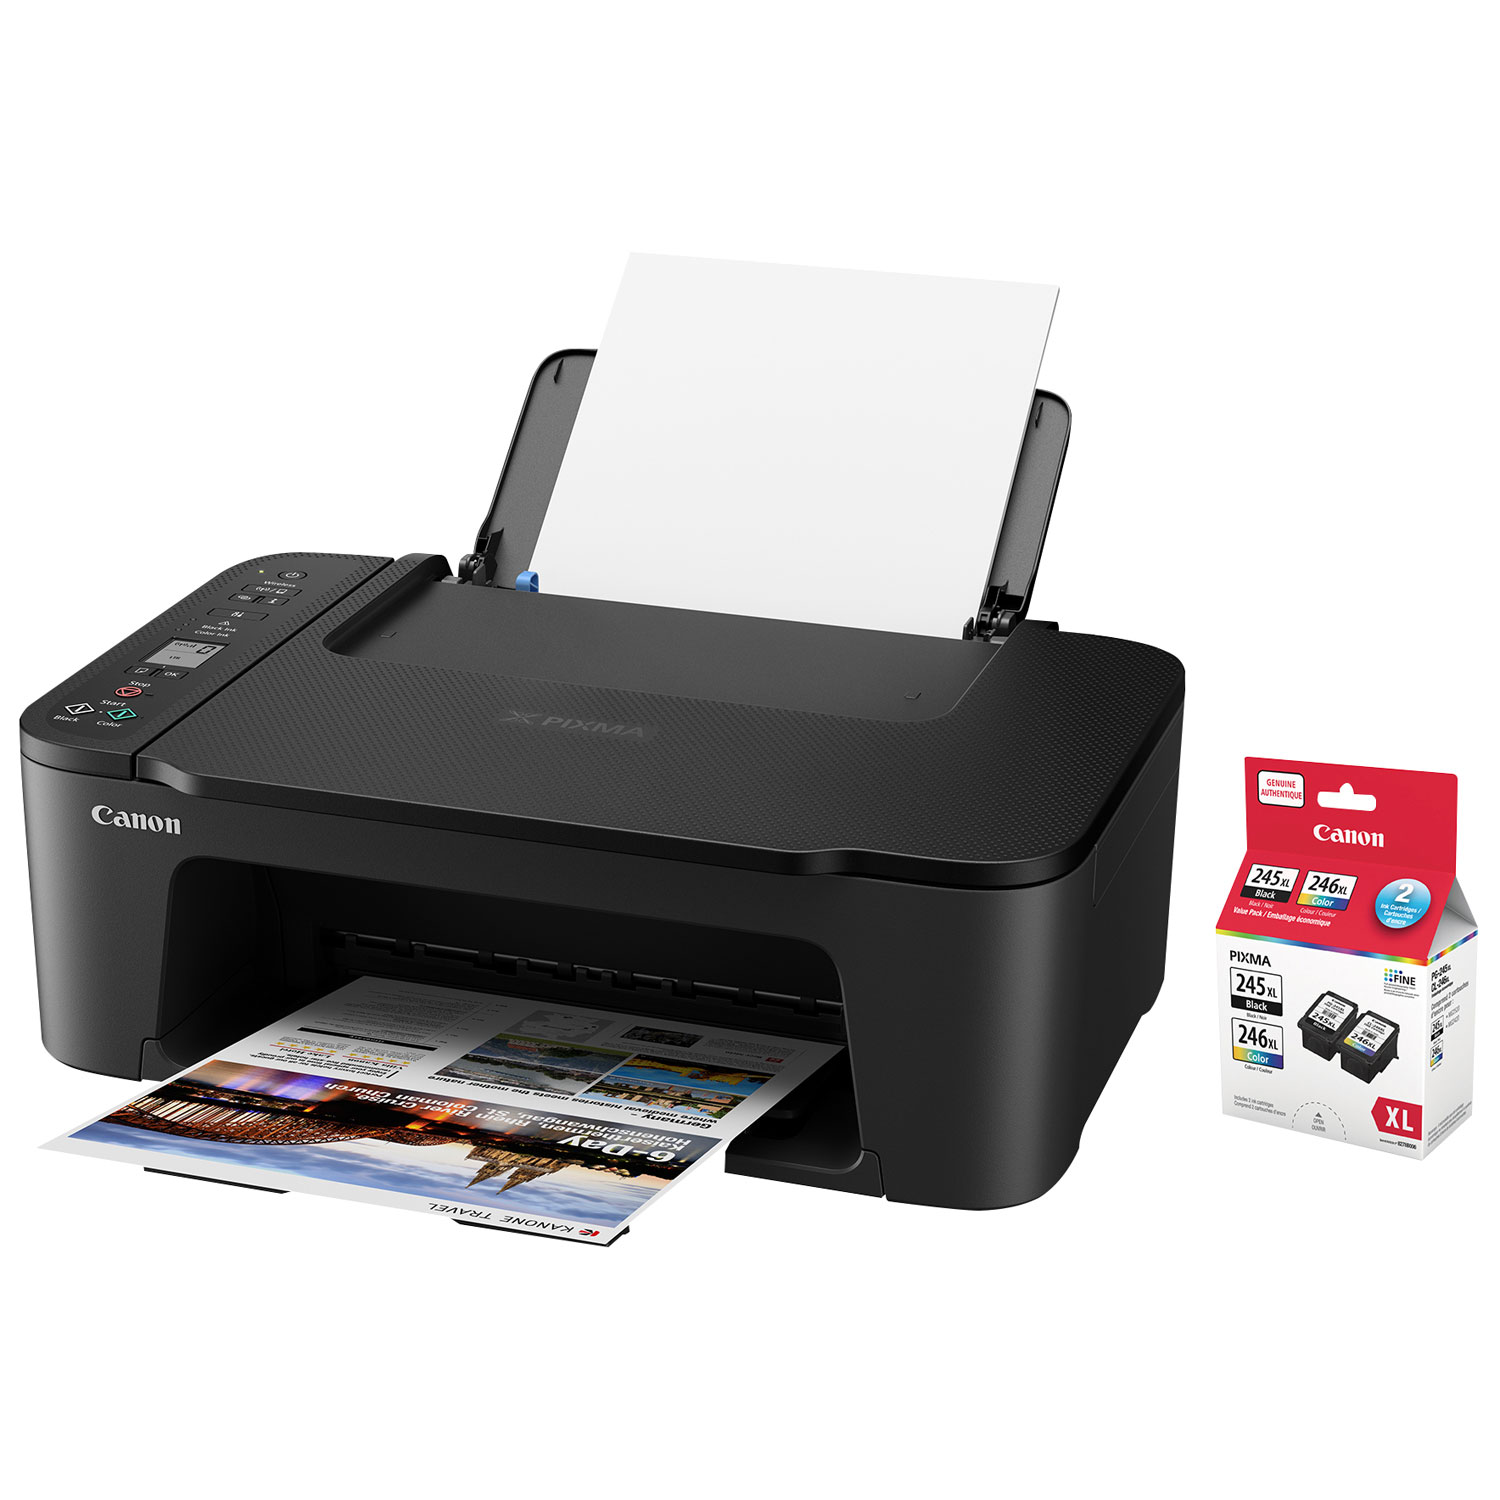 Canon PIXMA TS3429 Wireless All-In-One Inkjet Printer w/ Black/Colour Ink - 2 Pk - Only at Best Buy